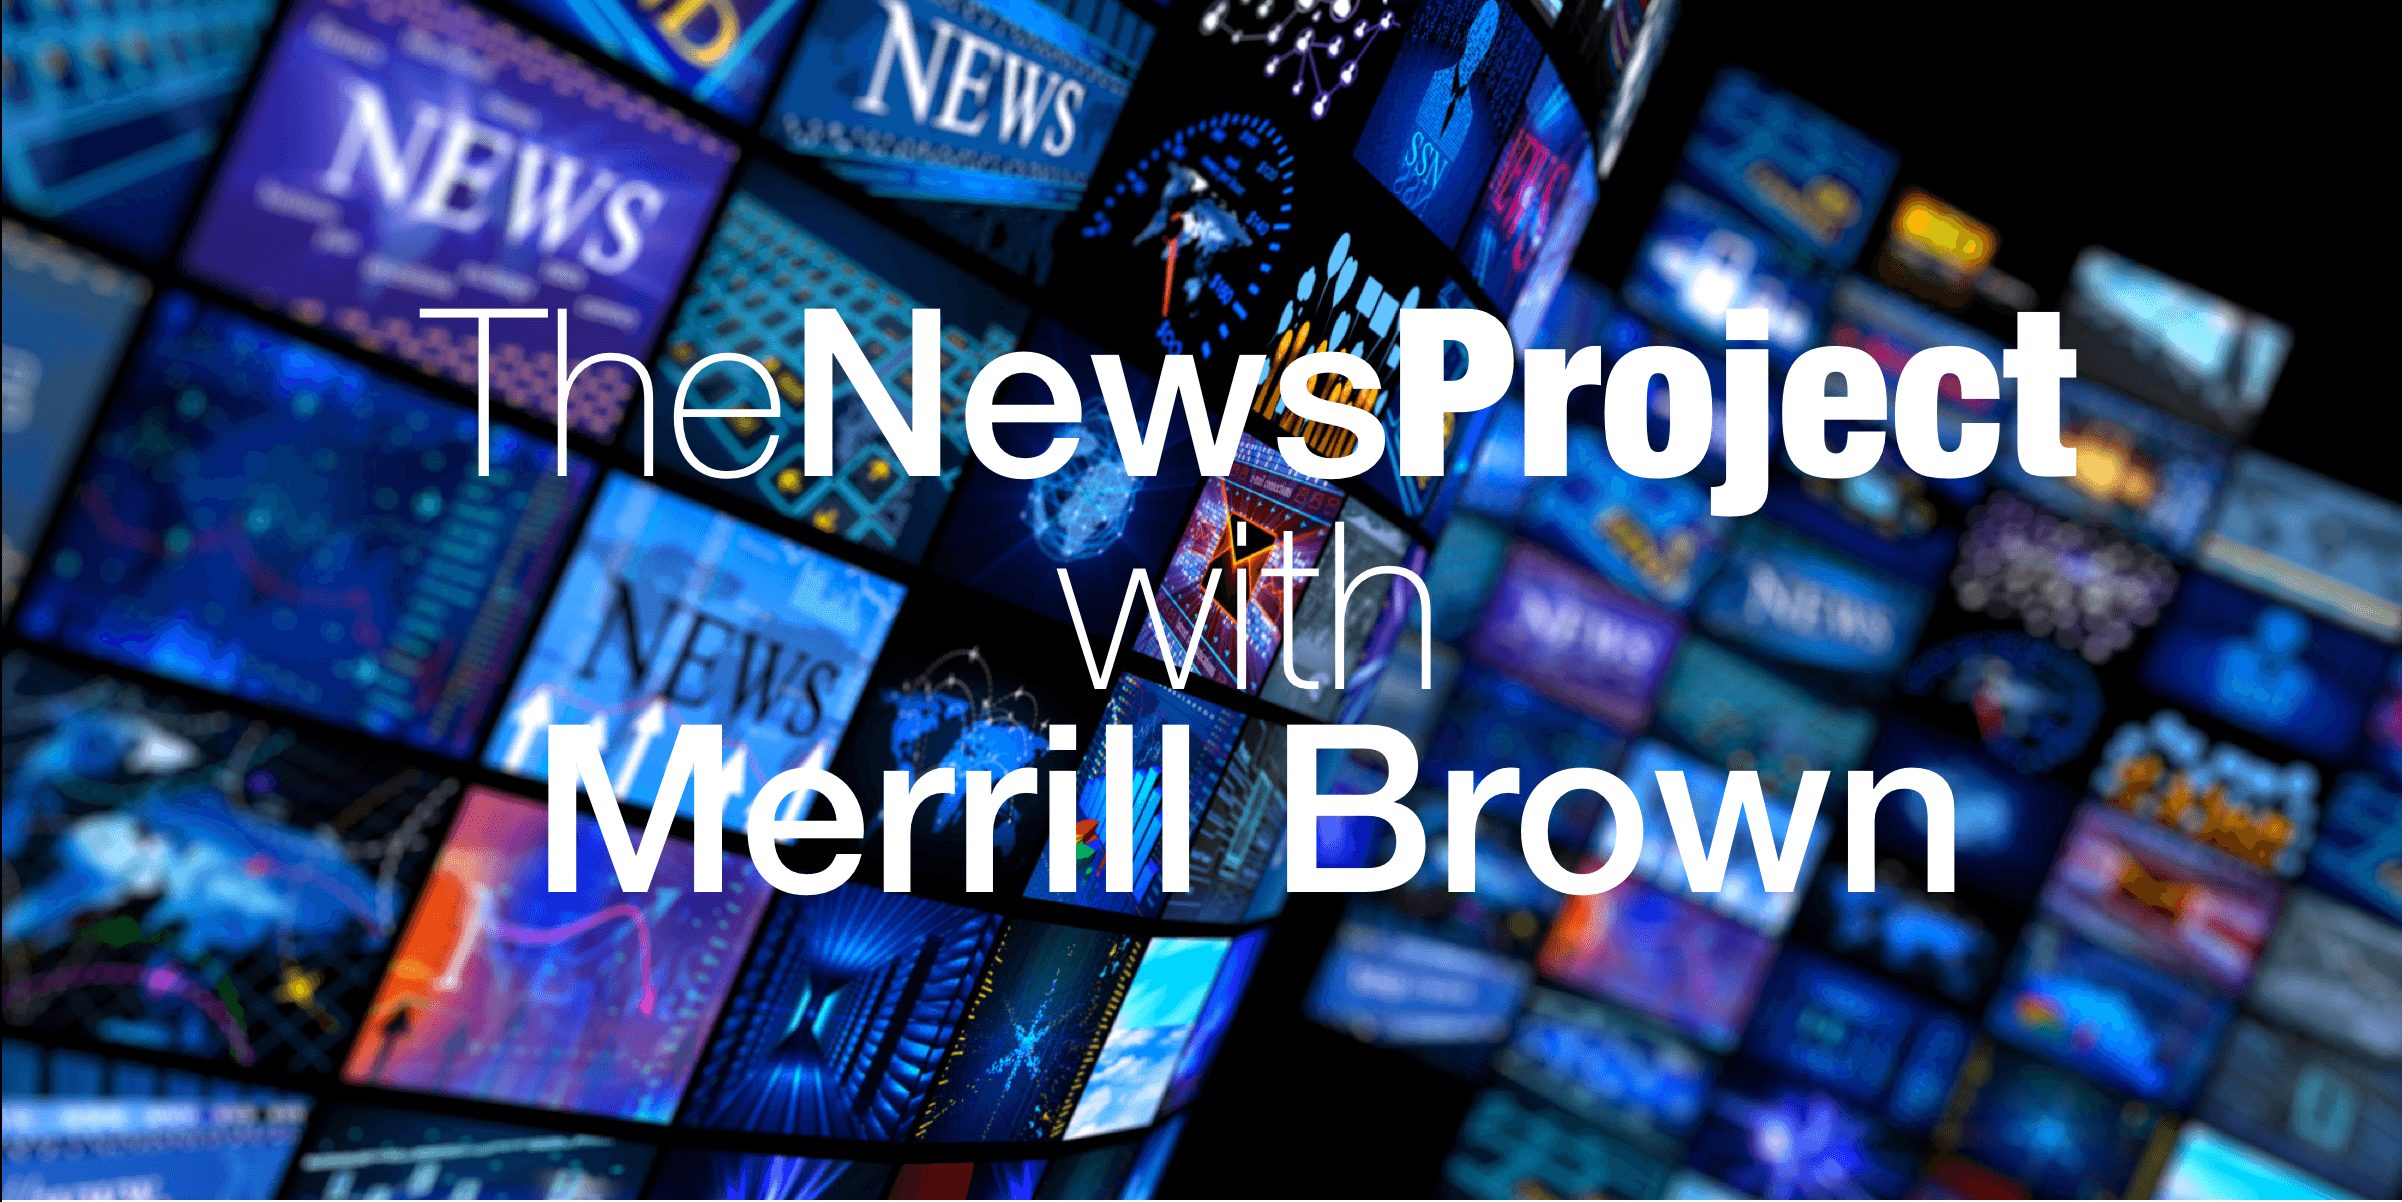 The News Project Merrill Brown